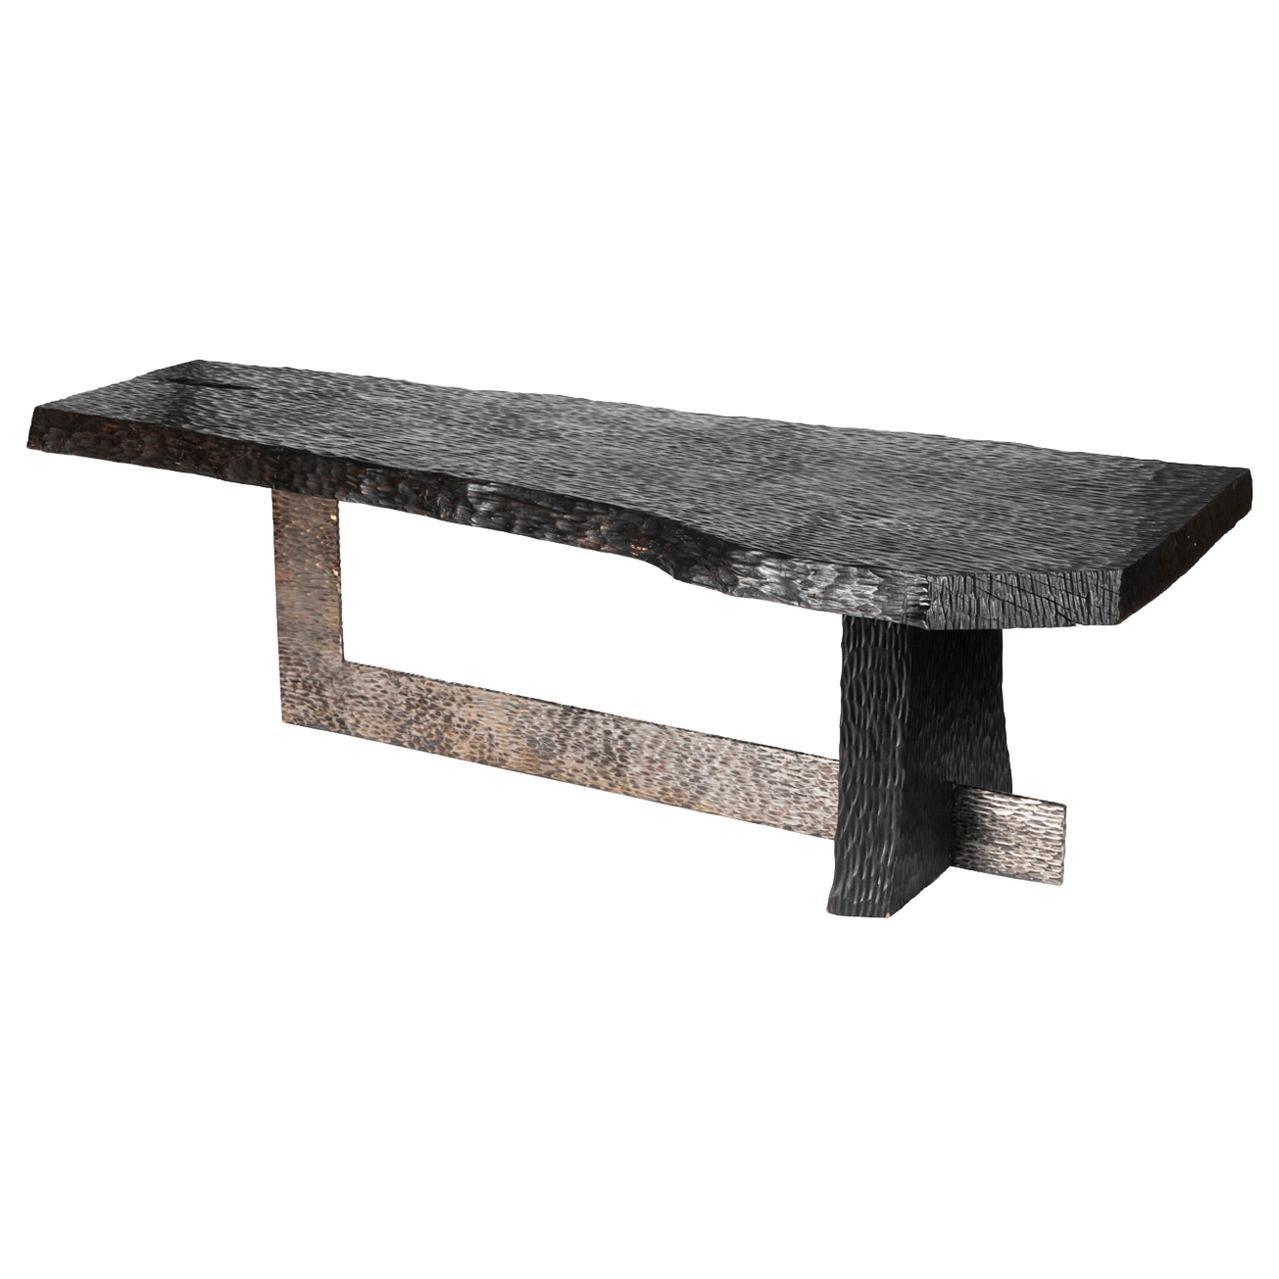 Blackened Gouged Wood Coffee Table, Contemporary Work For Sale